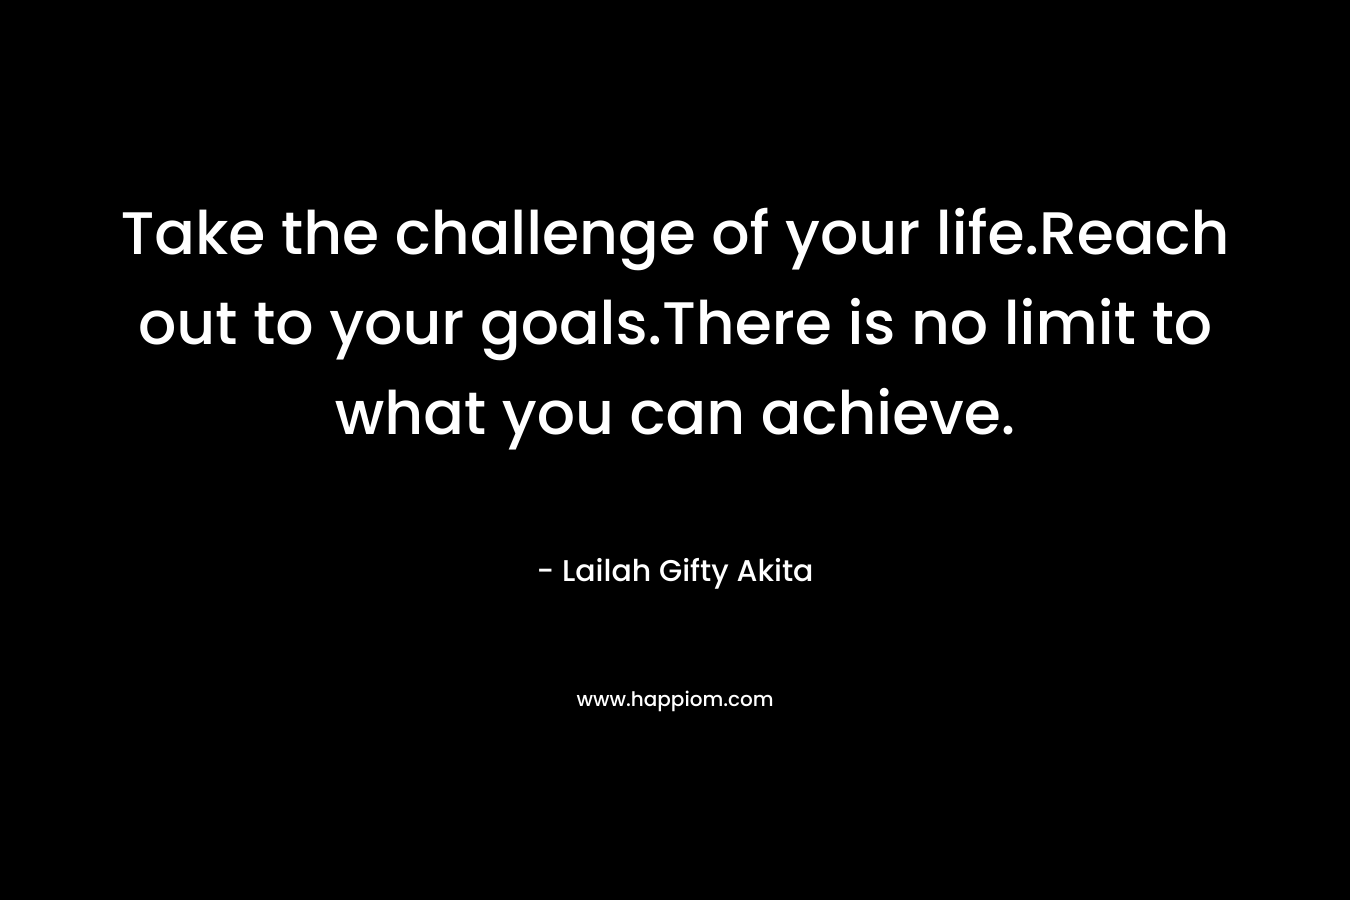 Take the challenge of your life.Reach out to your goals.There is no limit to what you can achieve.